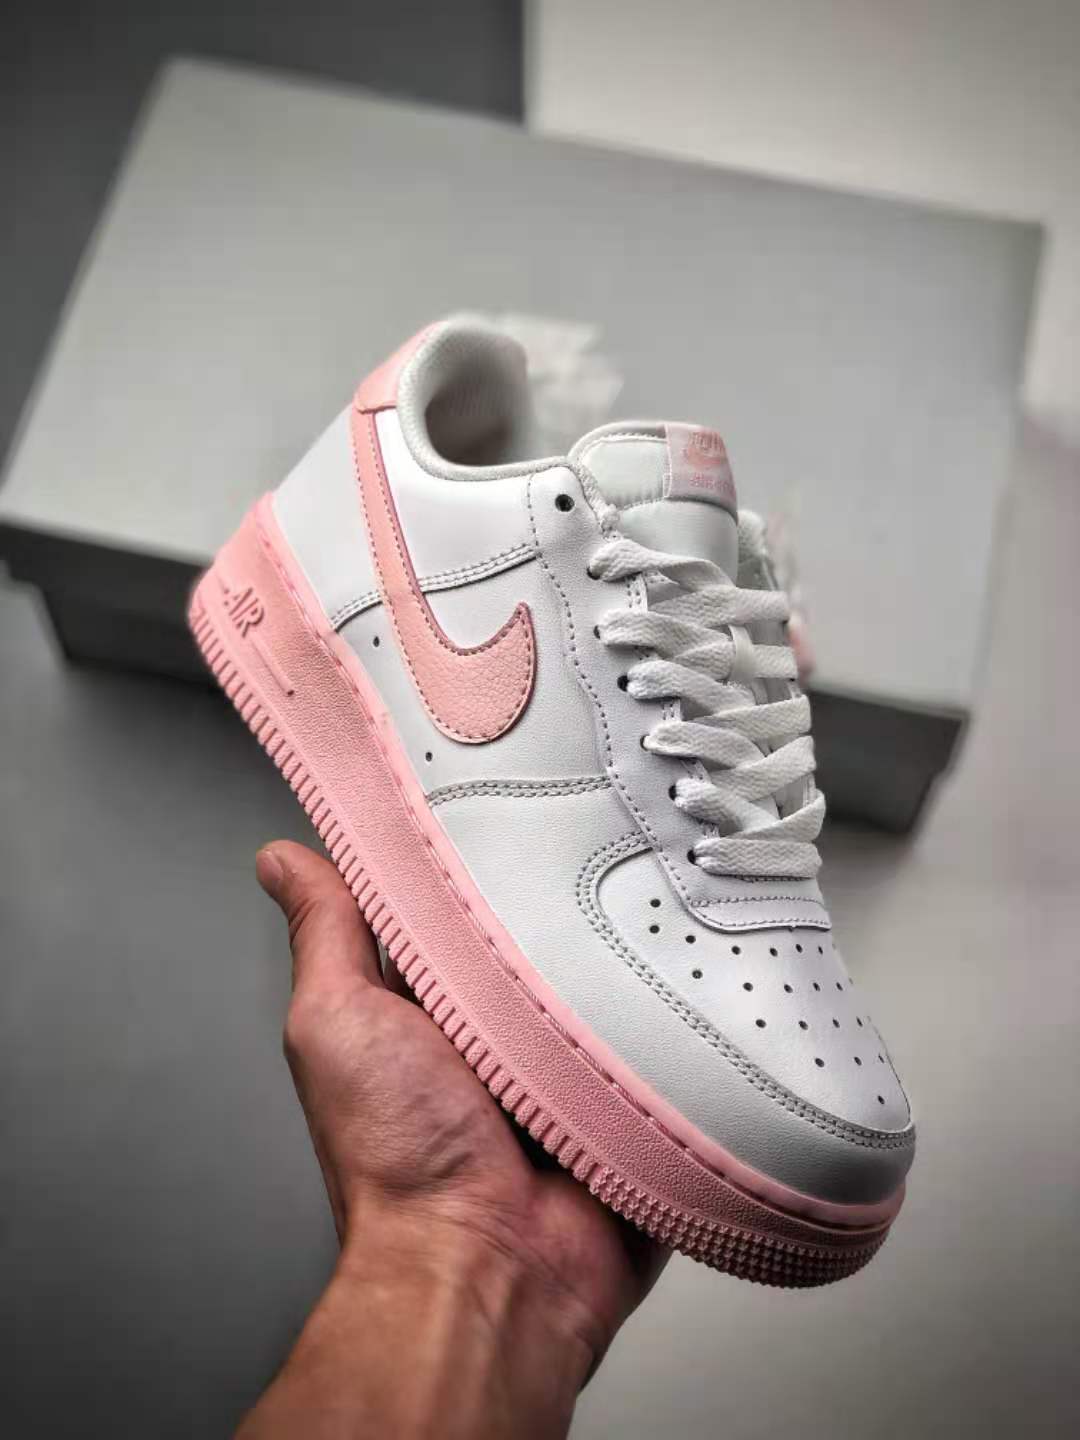 Nike Air Force 1 'White Pink Foam' CV7663-100 - Stylish and Comfortable Sneakers